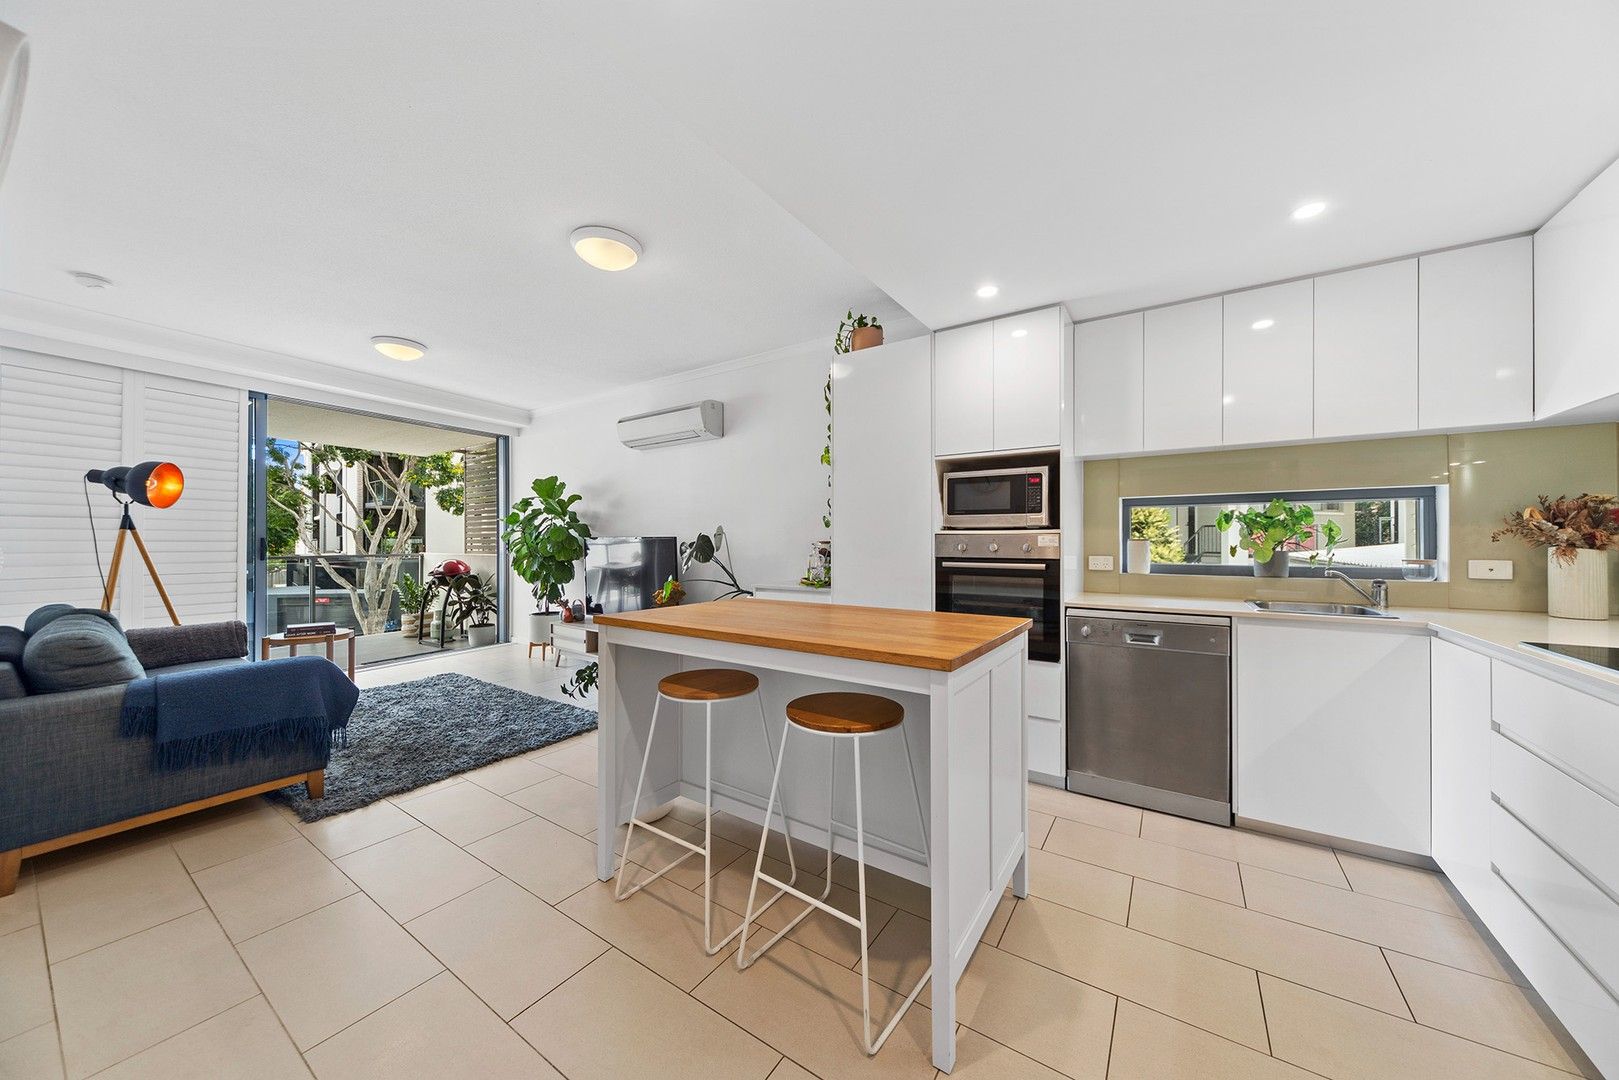 2 bedrooms Apartment / Unit / Flat in 12/30 Colton Avenue LUTWYCHE QLD, 4030